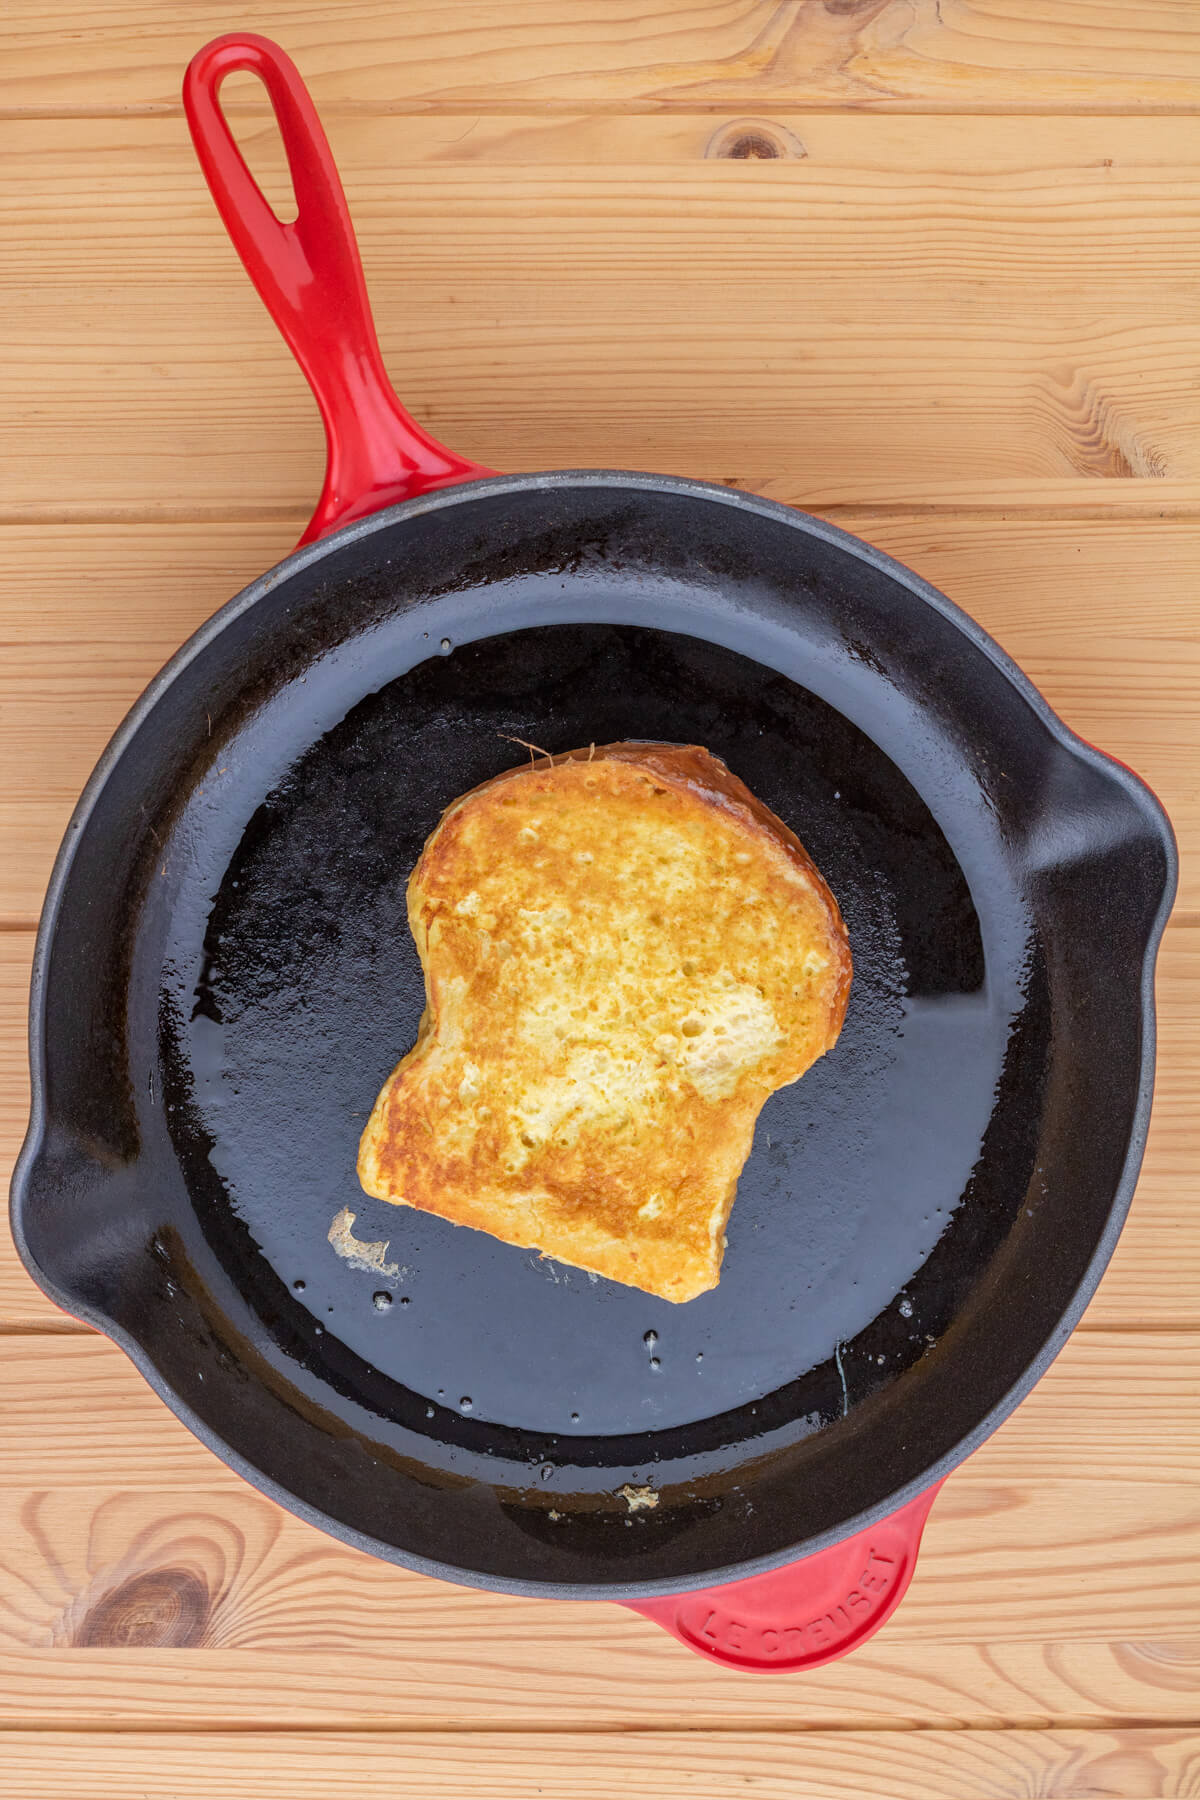 A slice of golden Brioche French toast in a red le creuset frying pan.